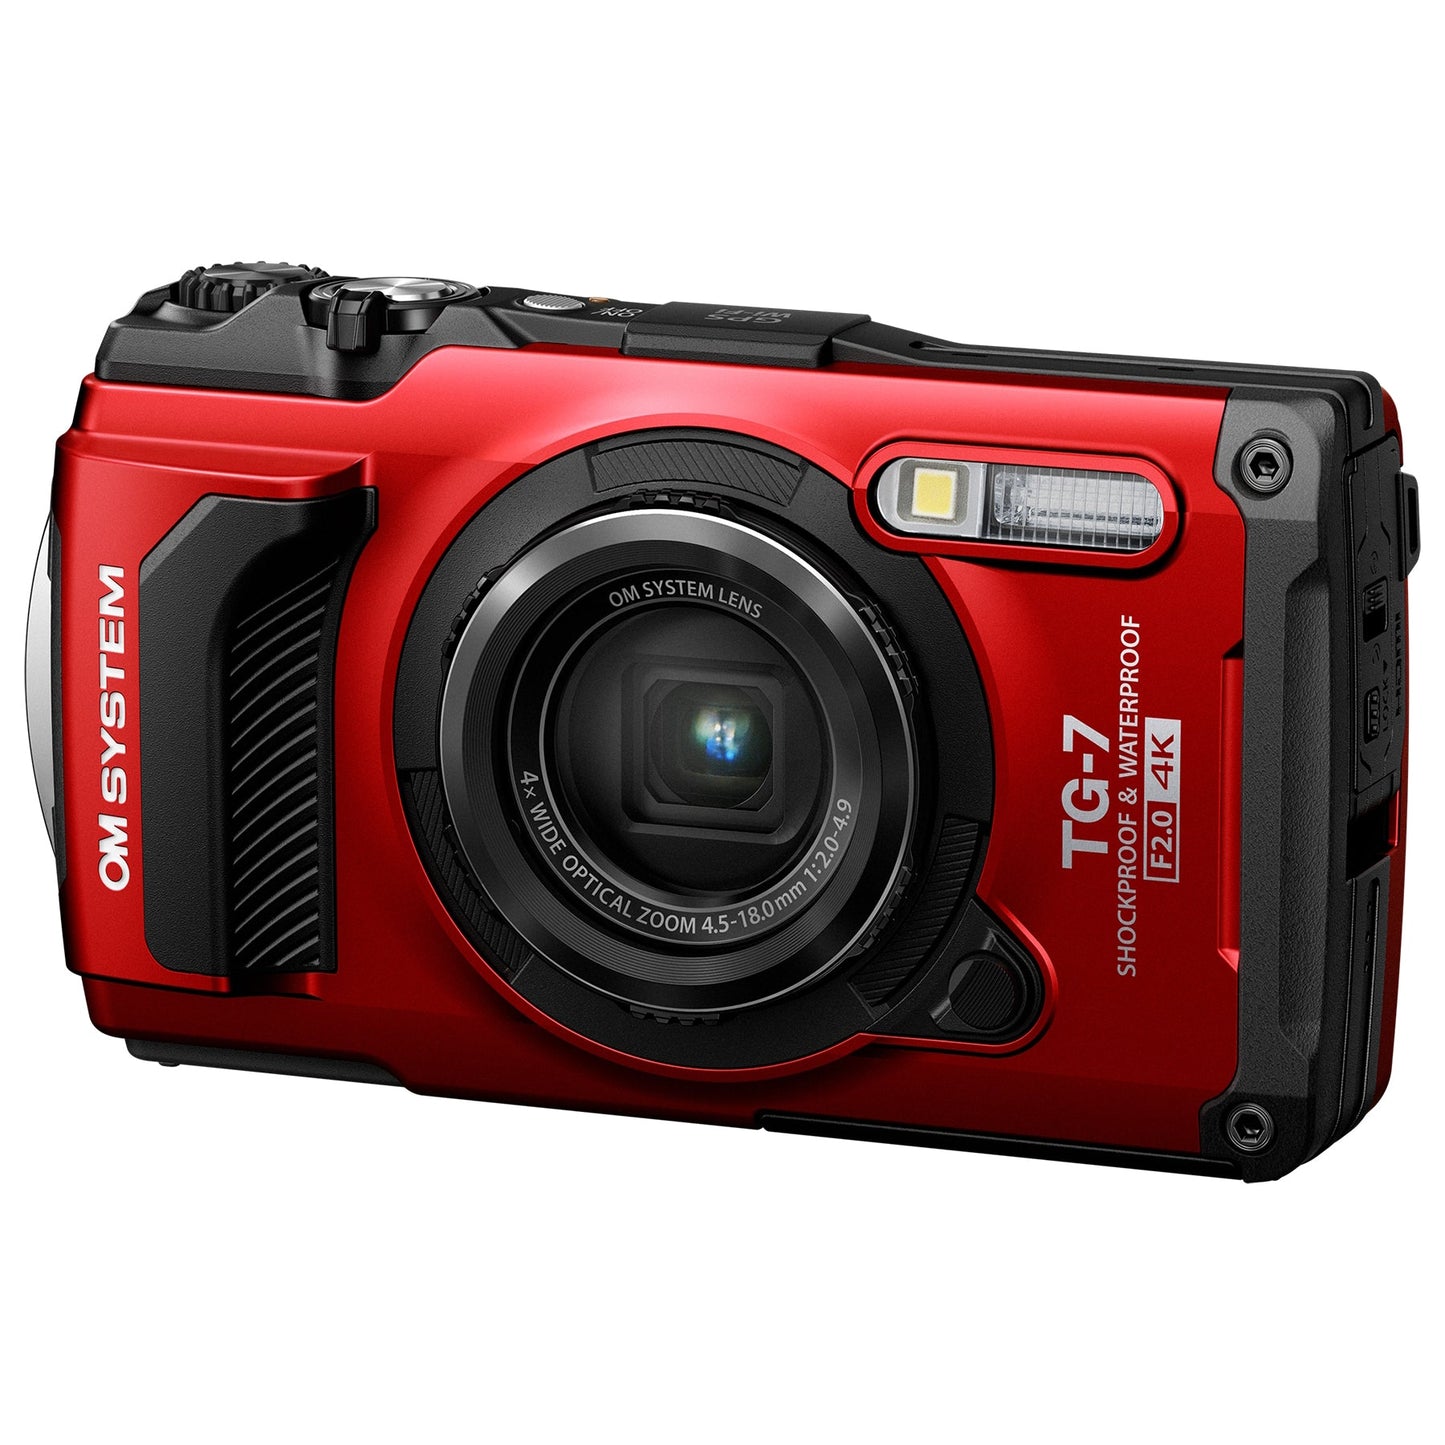 OM System TG-7 12MP 4x Zoom Tough Compact Camera - maplin.co.uk